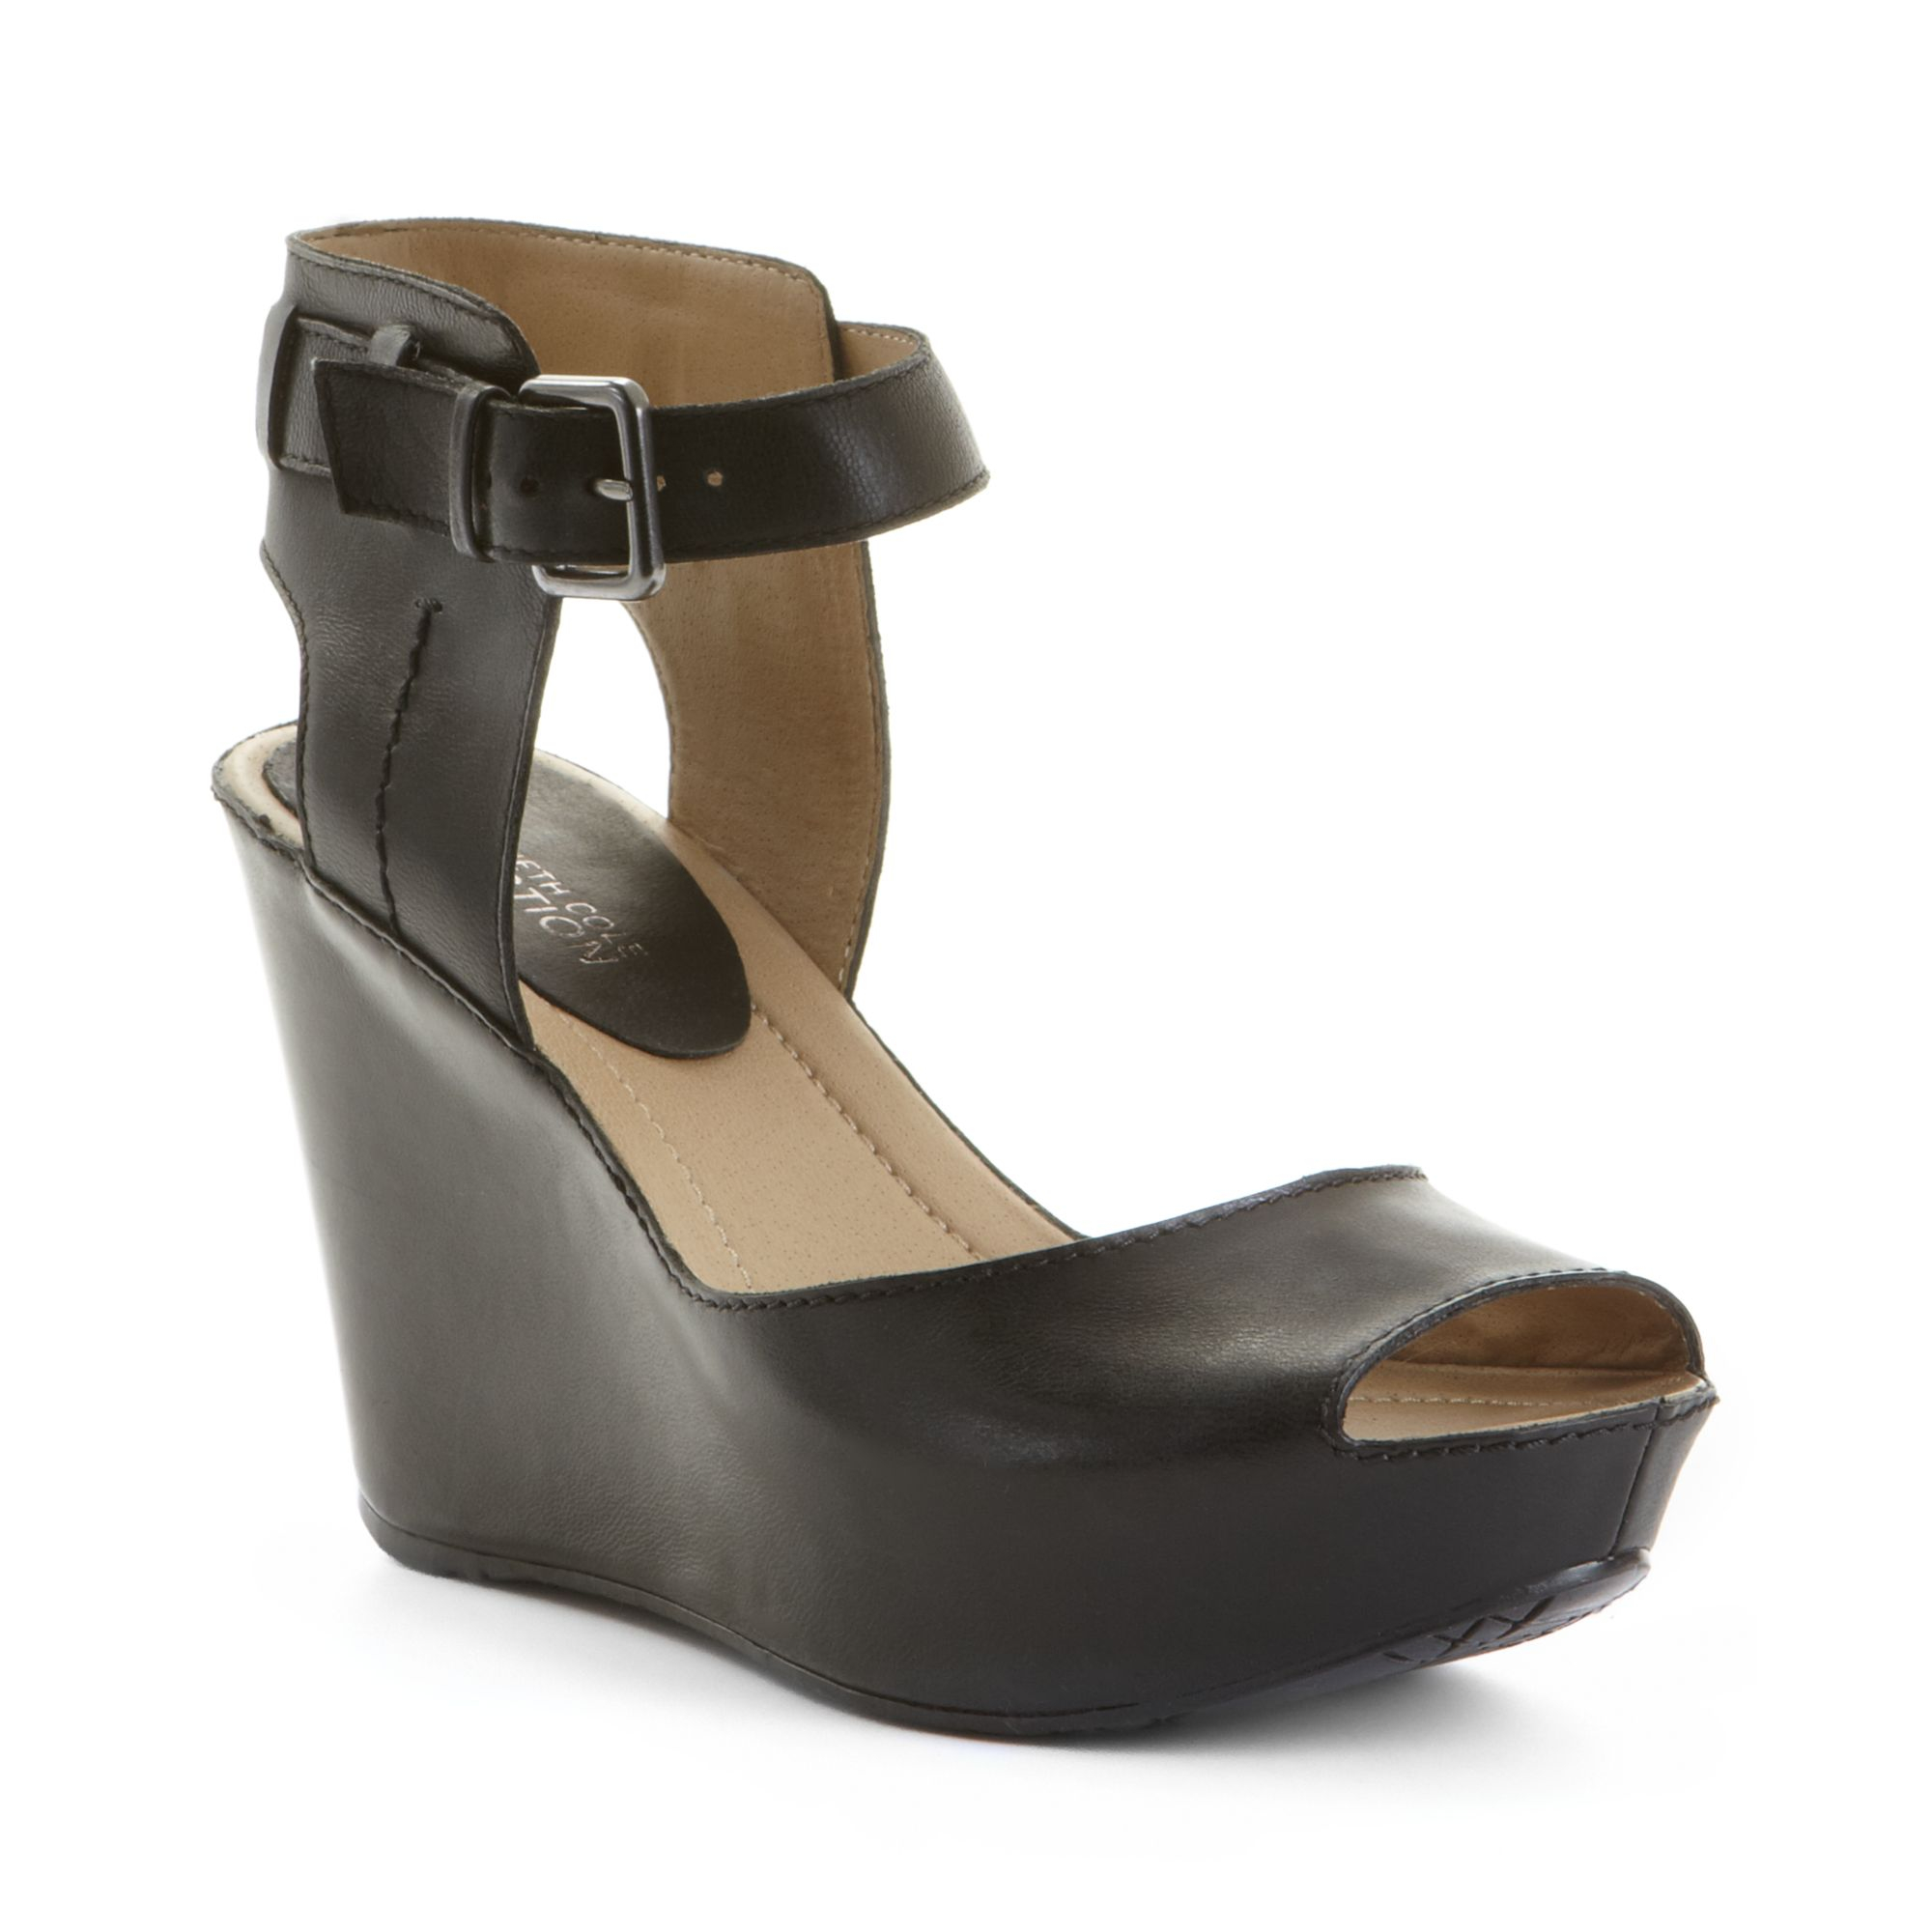 Kenneth Cole Reaction Sole My Heart Wedge Sandals in Black | Lyst